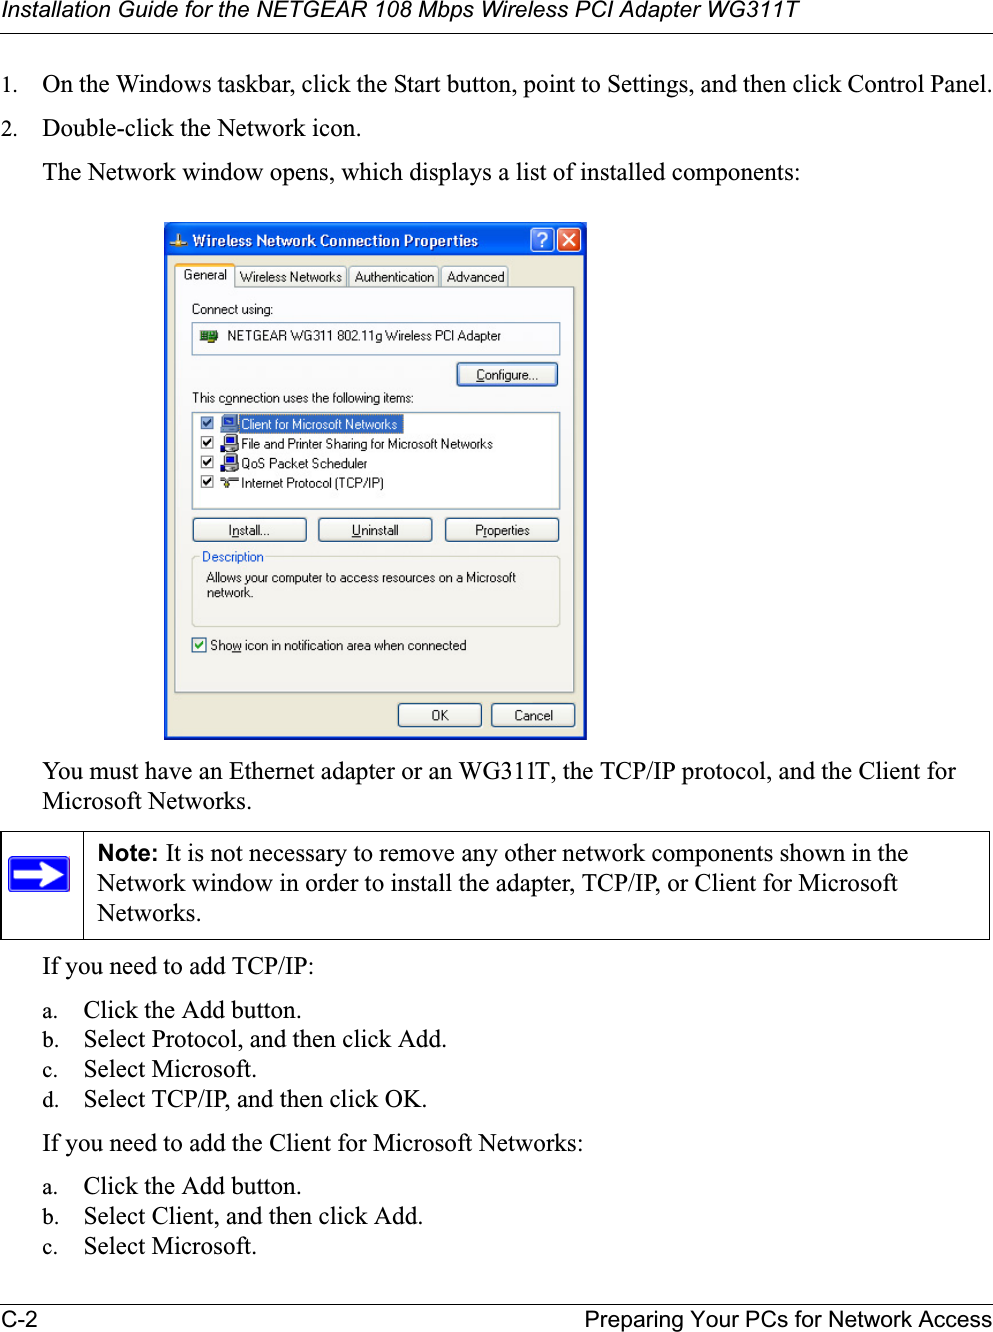 Installation Guide for the NETGEAR 108 Mbps Wireless PCI Adapter WG311TC-2 Preparing Your PCs for Network Access1. On the Windows taskbar, click the Start button, point to Settings, and then click Control Panel.2. Double-click the Network icon.The Network window opens, which displays a list of installed components:You must have an Ethernet adapter or an WG311T, the TCP/IP protocol, and the Client for Microsoft Networks.If you need to add TCP/IP:a. Click the Add button.b. Select Protocol, and then click Add.c. Select Microsoft.d. Select TCP/IP, and then click OK.If you need to add the Client for Microsoft Networks:a. Click the Add button.b. Select Client, and then click Add.c. Select Microsoft.Note: It is not necessary to remove any other network components shown in the Network window in order to install the adapter, TCP/IP, or Client for Microsoft Networks.